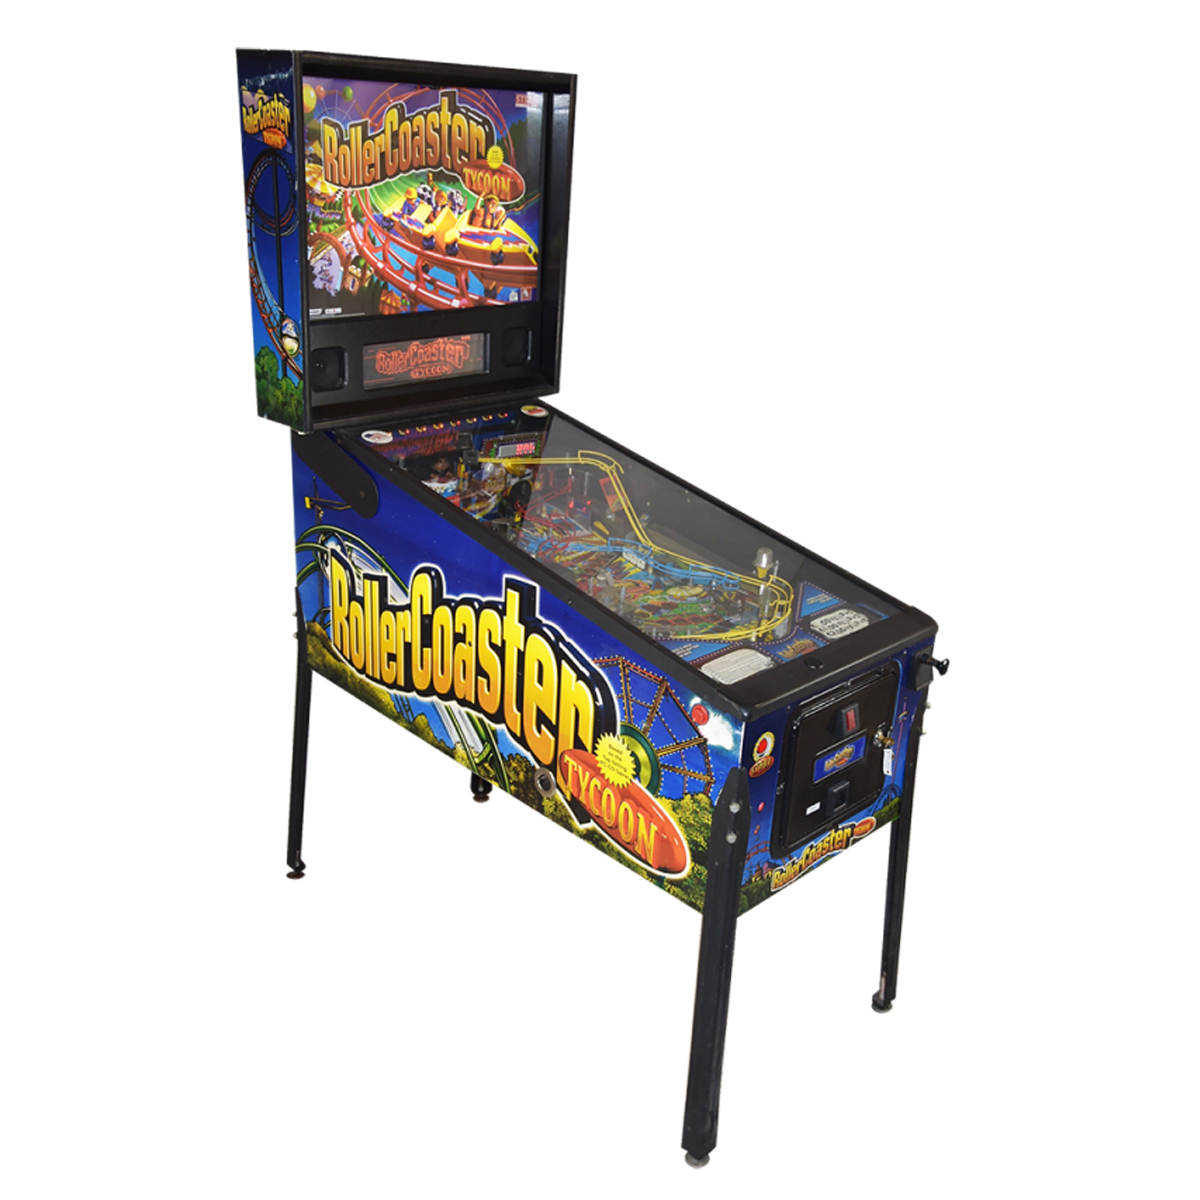 Roller Coaster Tycoon Pinball Machine Cover